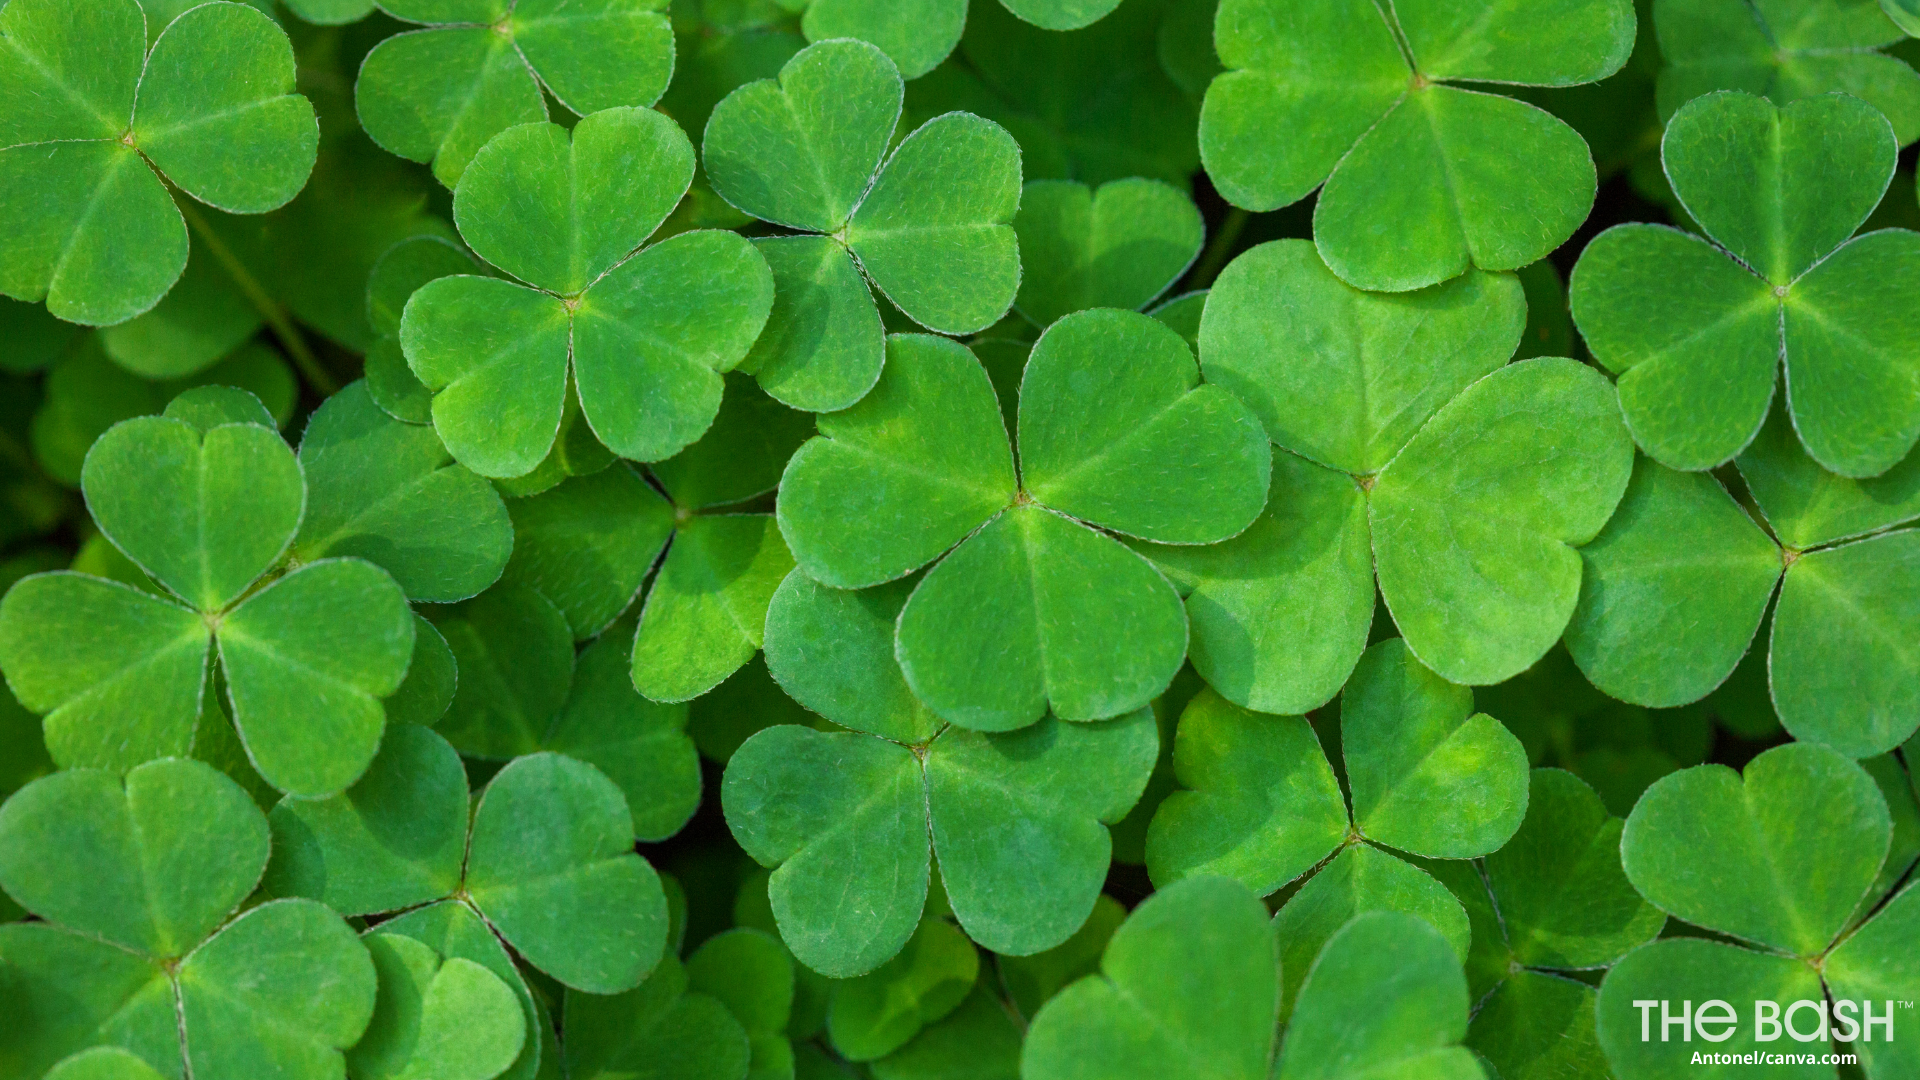 St pats HD wallpapers